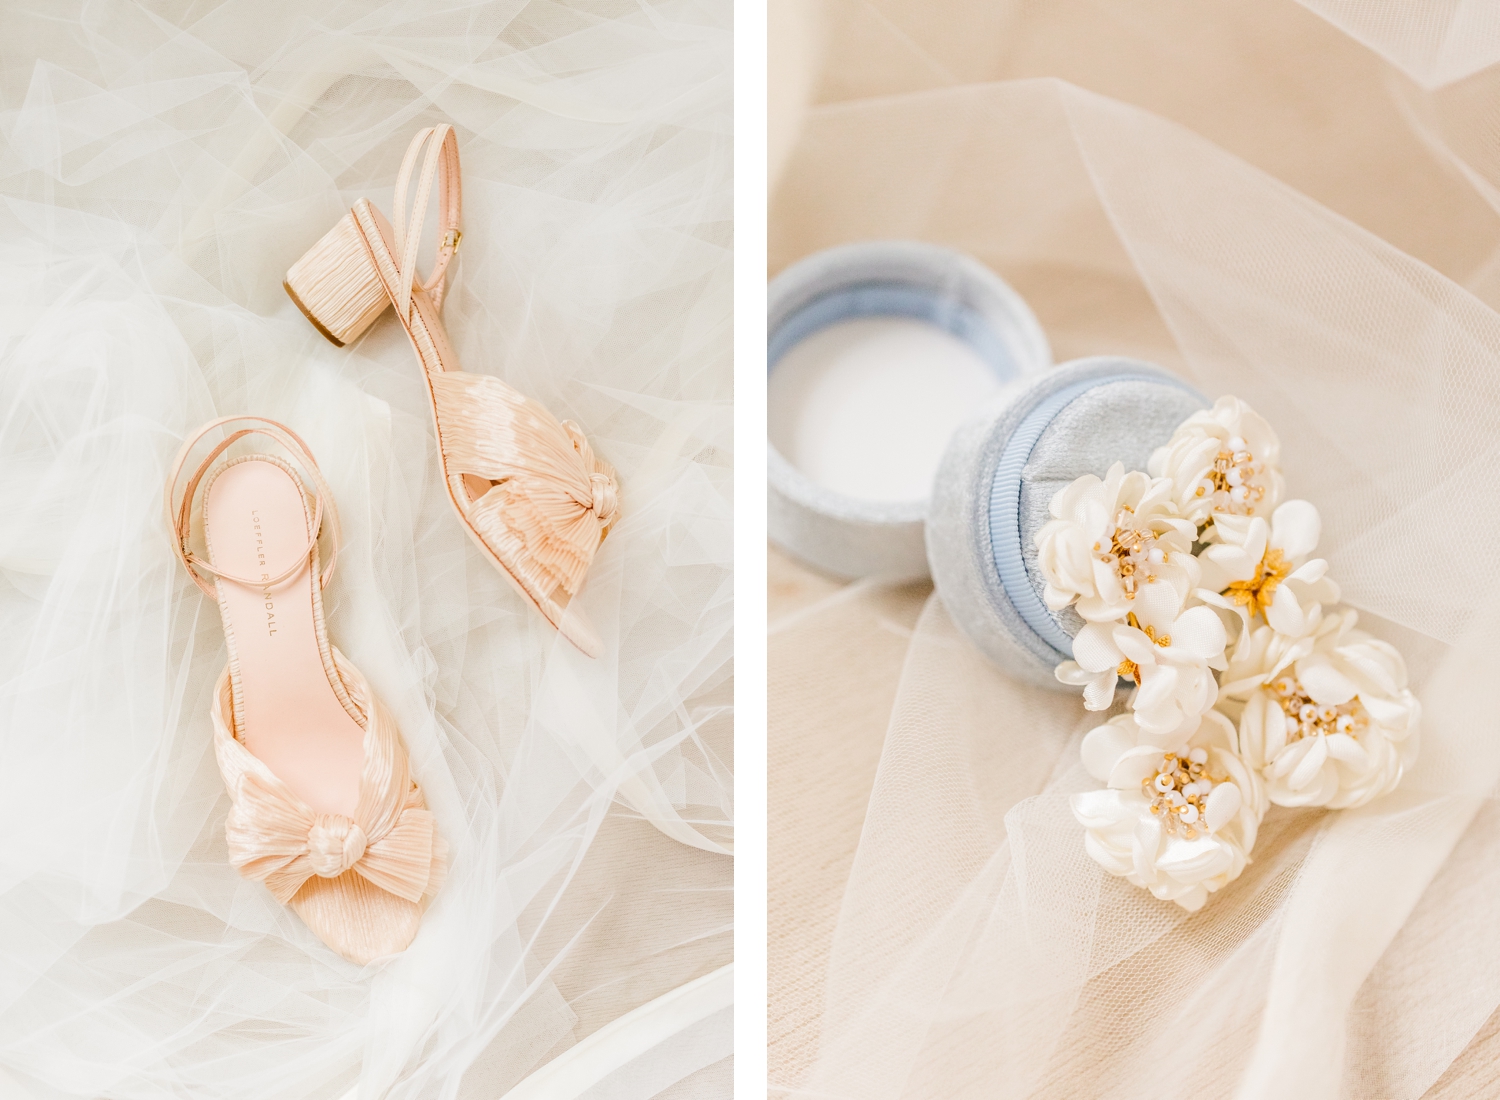 Bride's pale pink satin shoes on top of veil | bride's floral earrings on top of blue velvet box | Brooke Michelle Photo